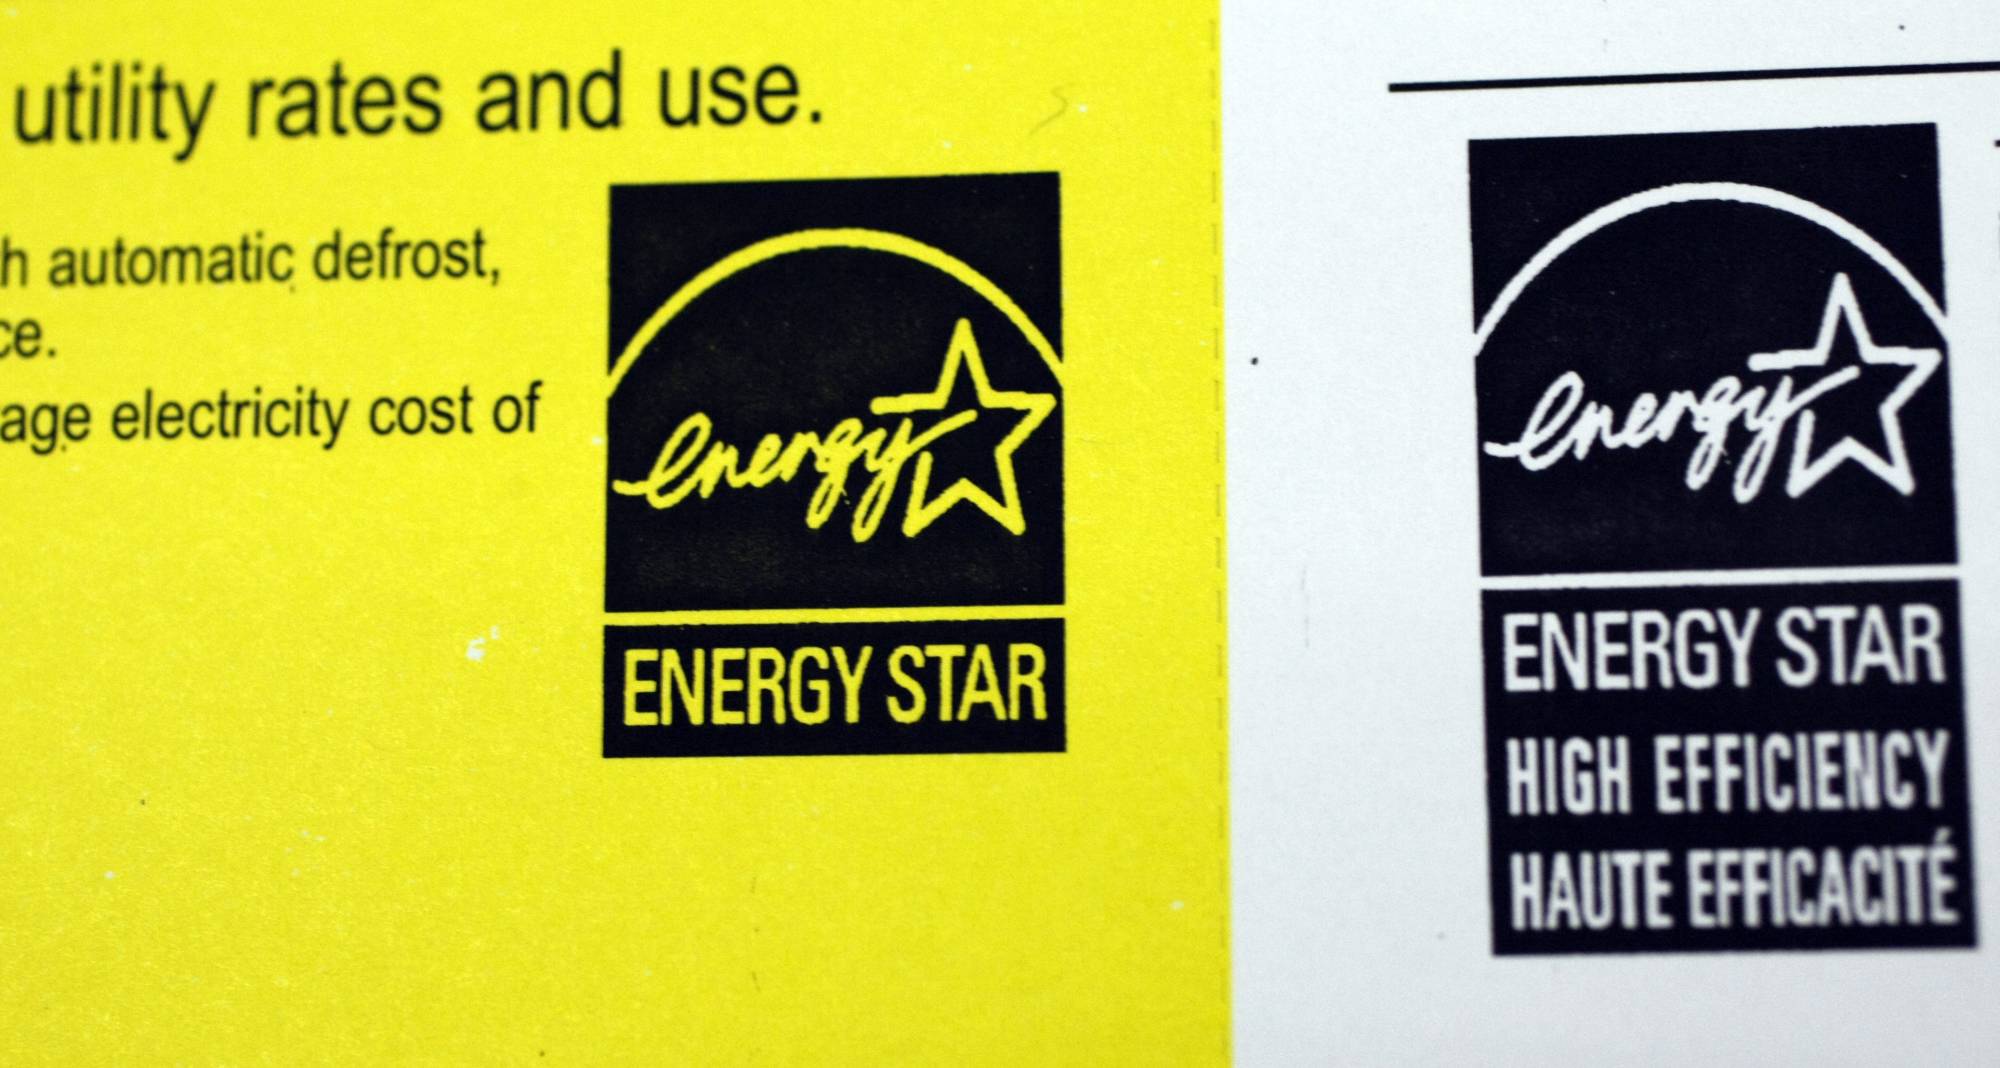 FILE- This March 9, 2010 file photo shows an Energy Star label at an appliance store in Mountain View, Calif. Some of the nation’s largest manufacturers are among more than 1,000 U.S. companies urging Congress to preserve the 25-year-old Energy Star program, which promotes efficiency in home and business products. (AP Photo/Paul Sakuma, File)